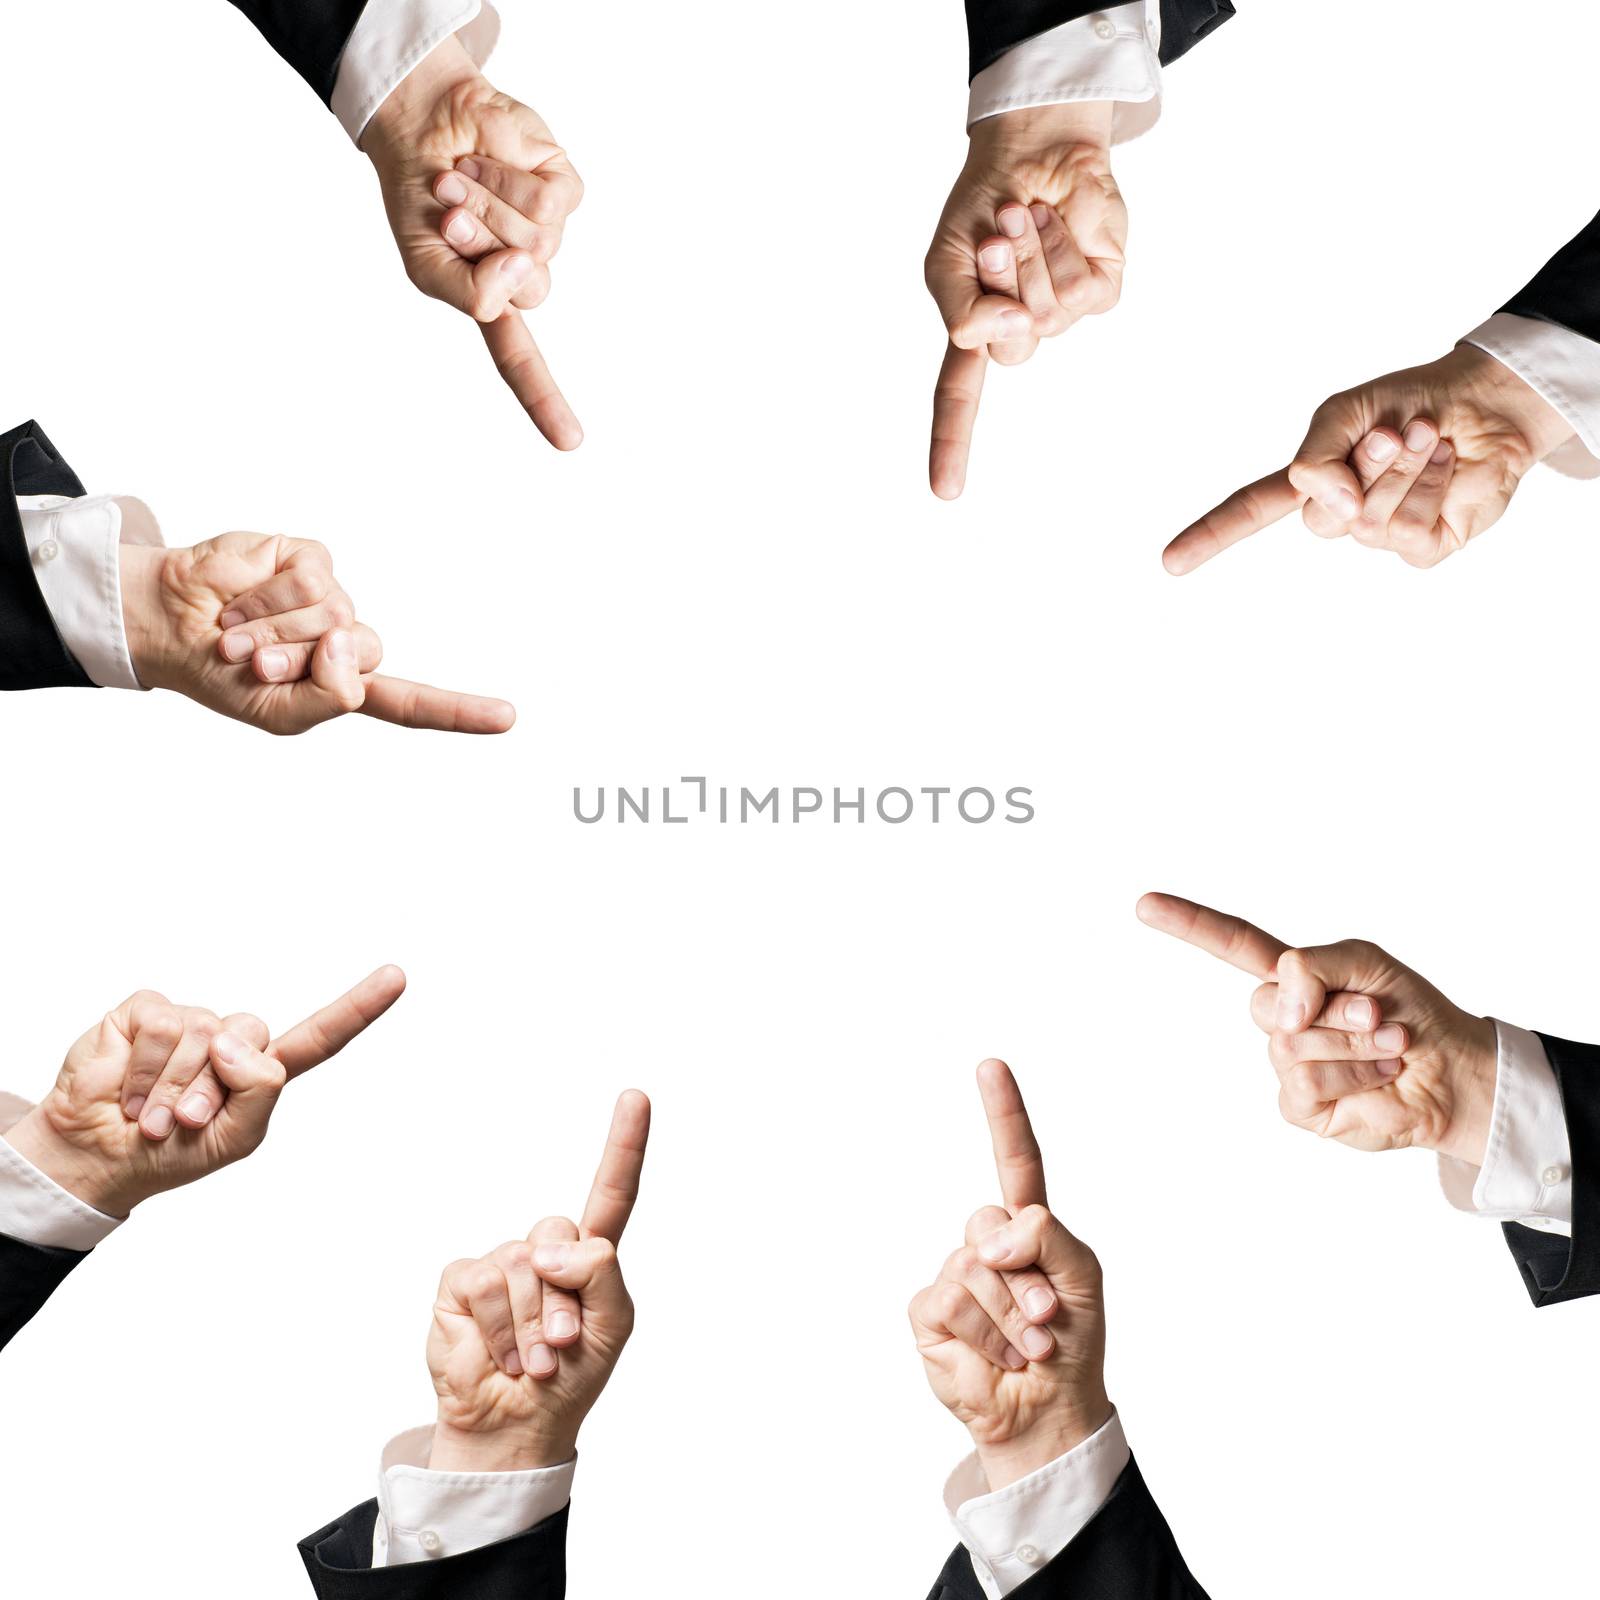 Several hands in suit against white background pointing to a common point in the center